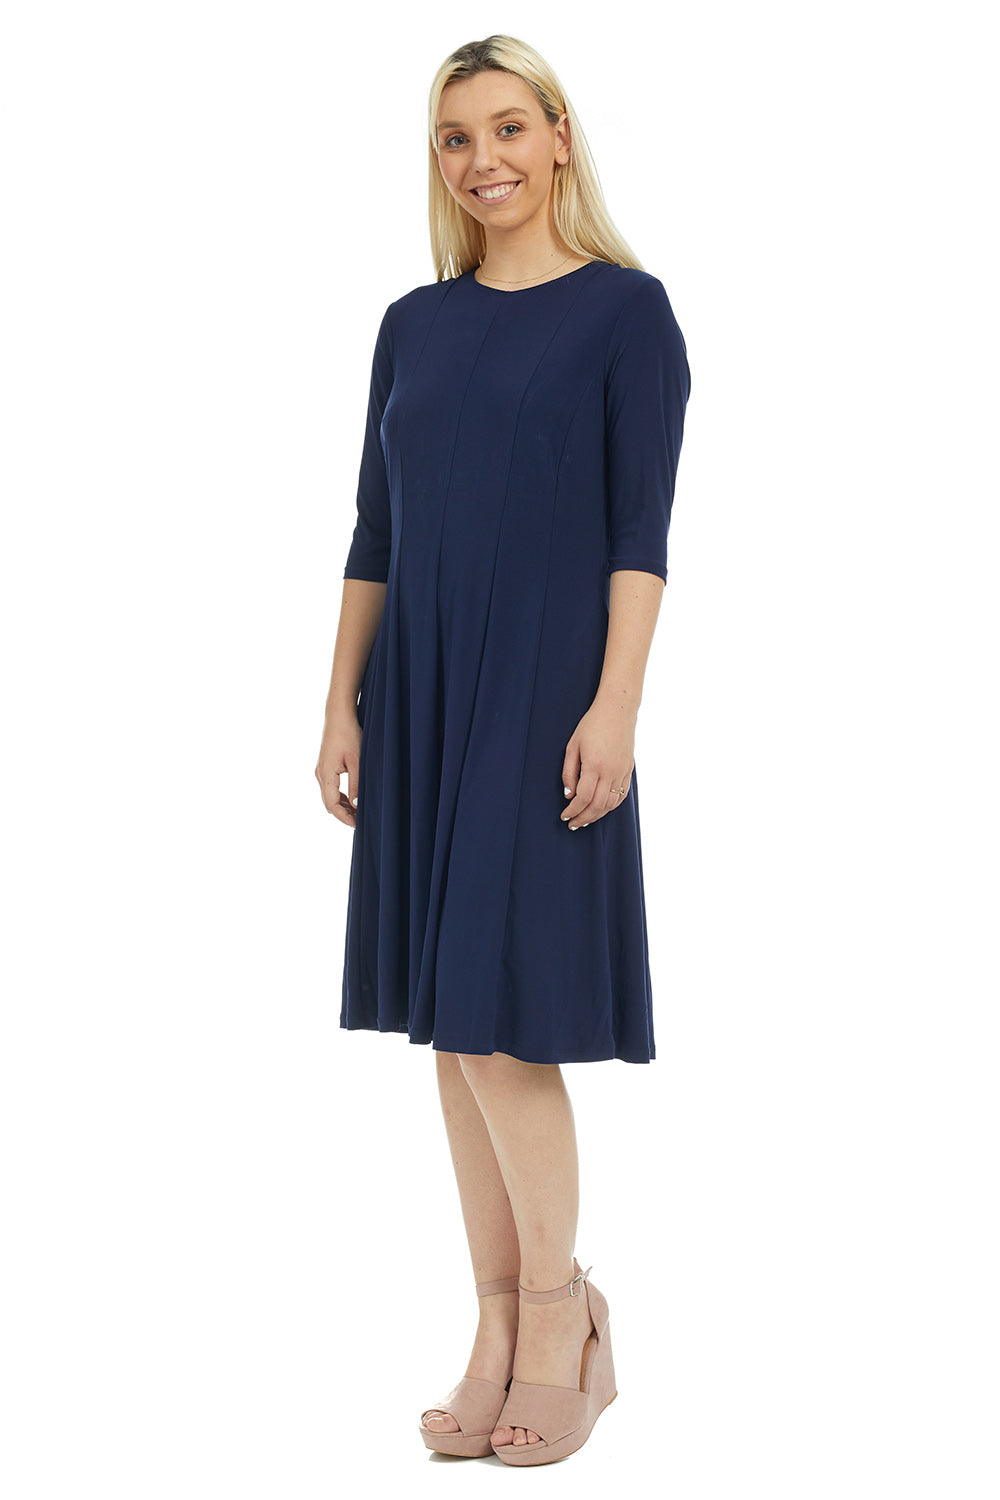 Esteez JUDEE Dress - Womens Classic Fit and Flare Dress with pockets - NAVY